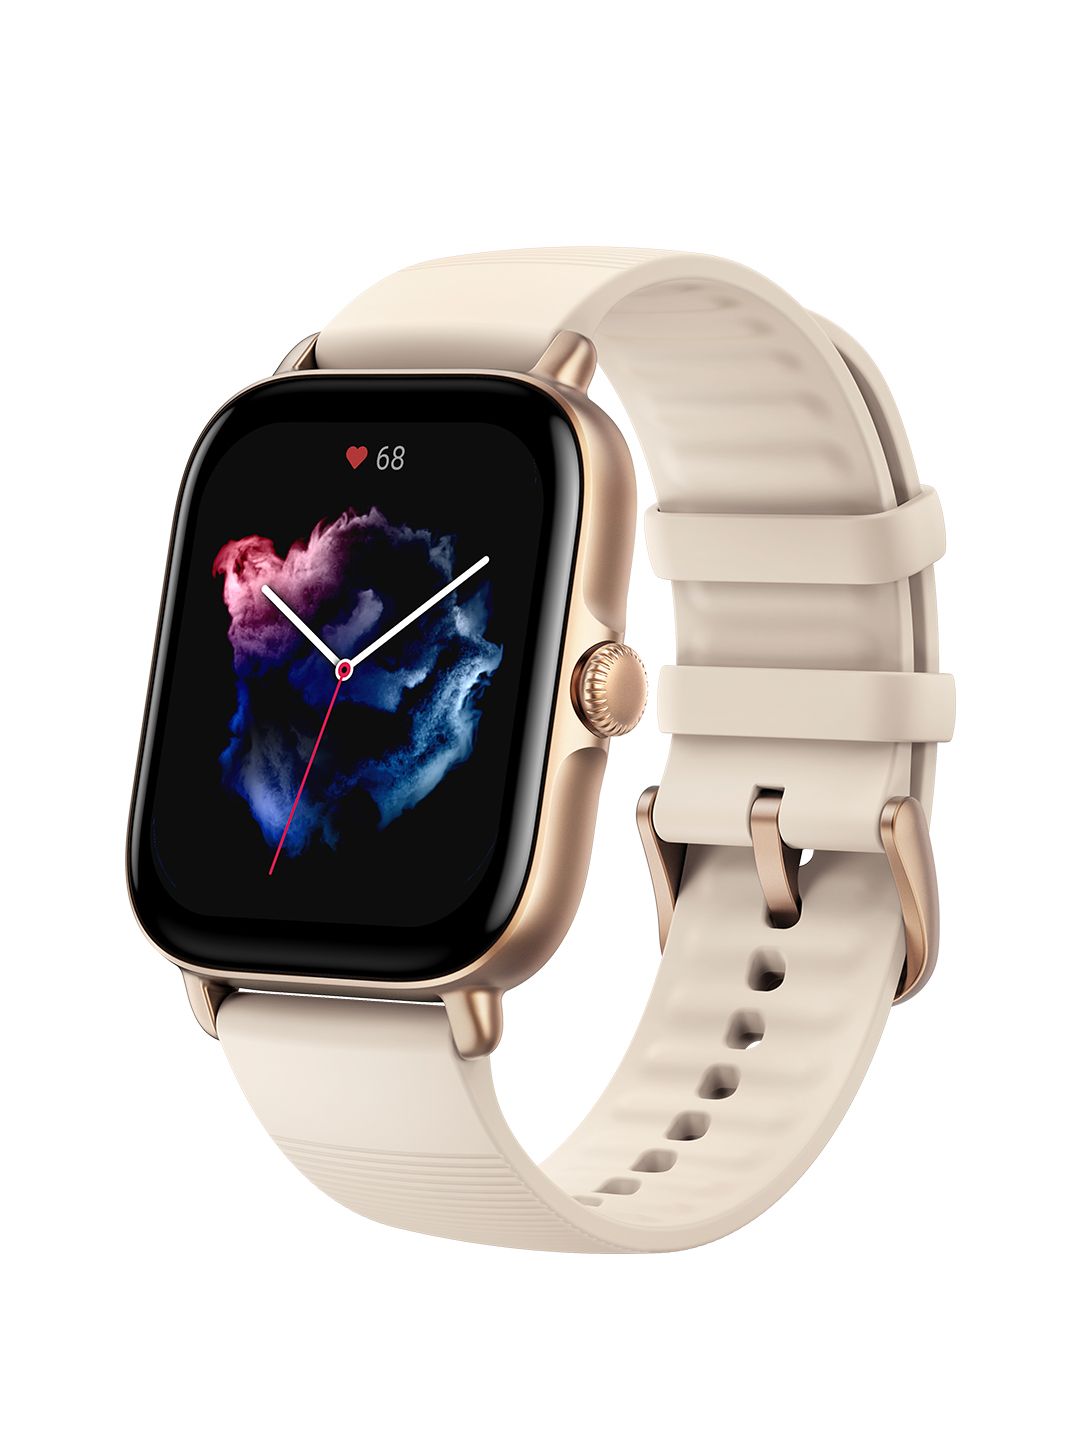 Amazfit White GTS 3 Smartwatch A2035 Price in India